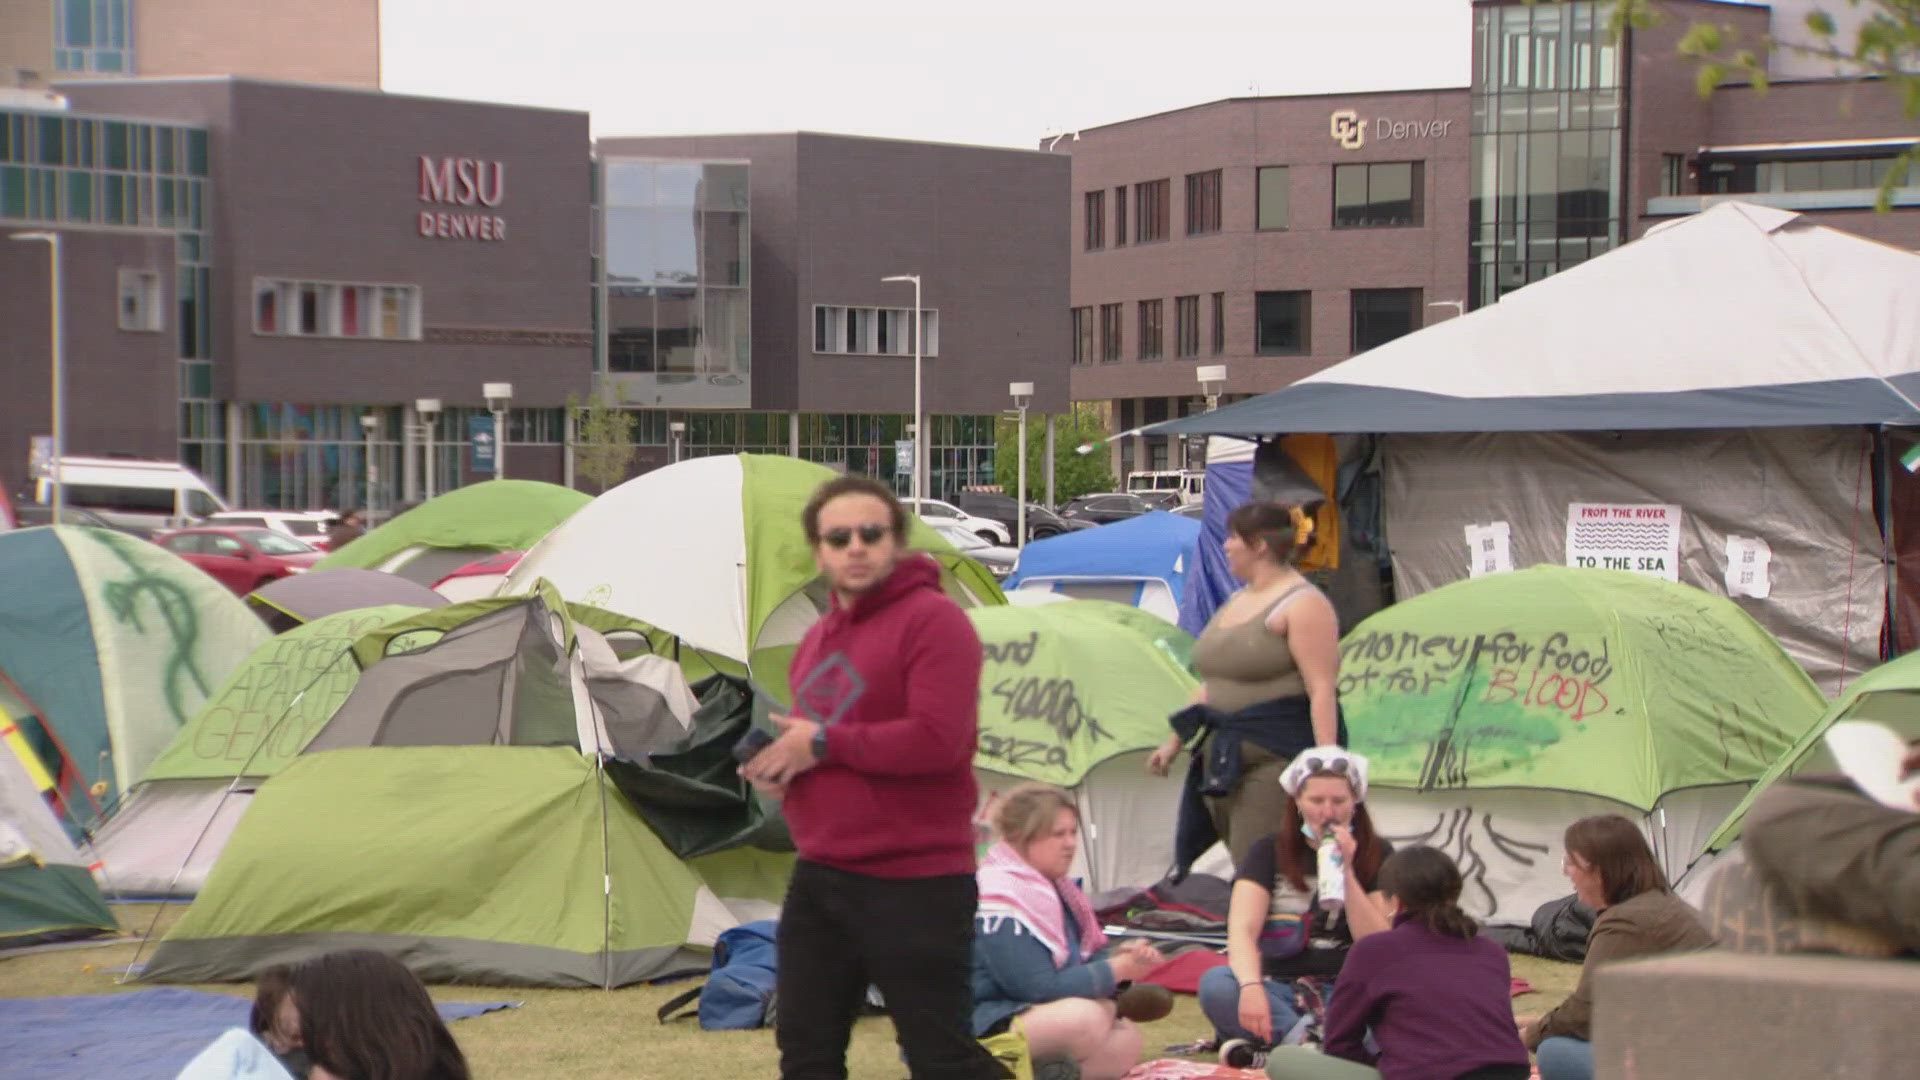 Pro-Palestine protesters have occupied the campus quad in Denver for days. Chief Ron Thomas said Friday he doesn't think there's a legal way to remove their tents.